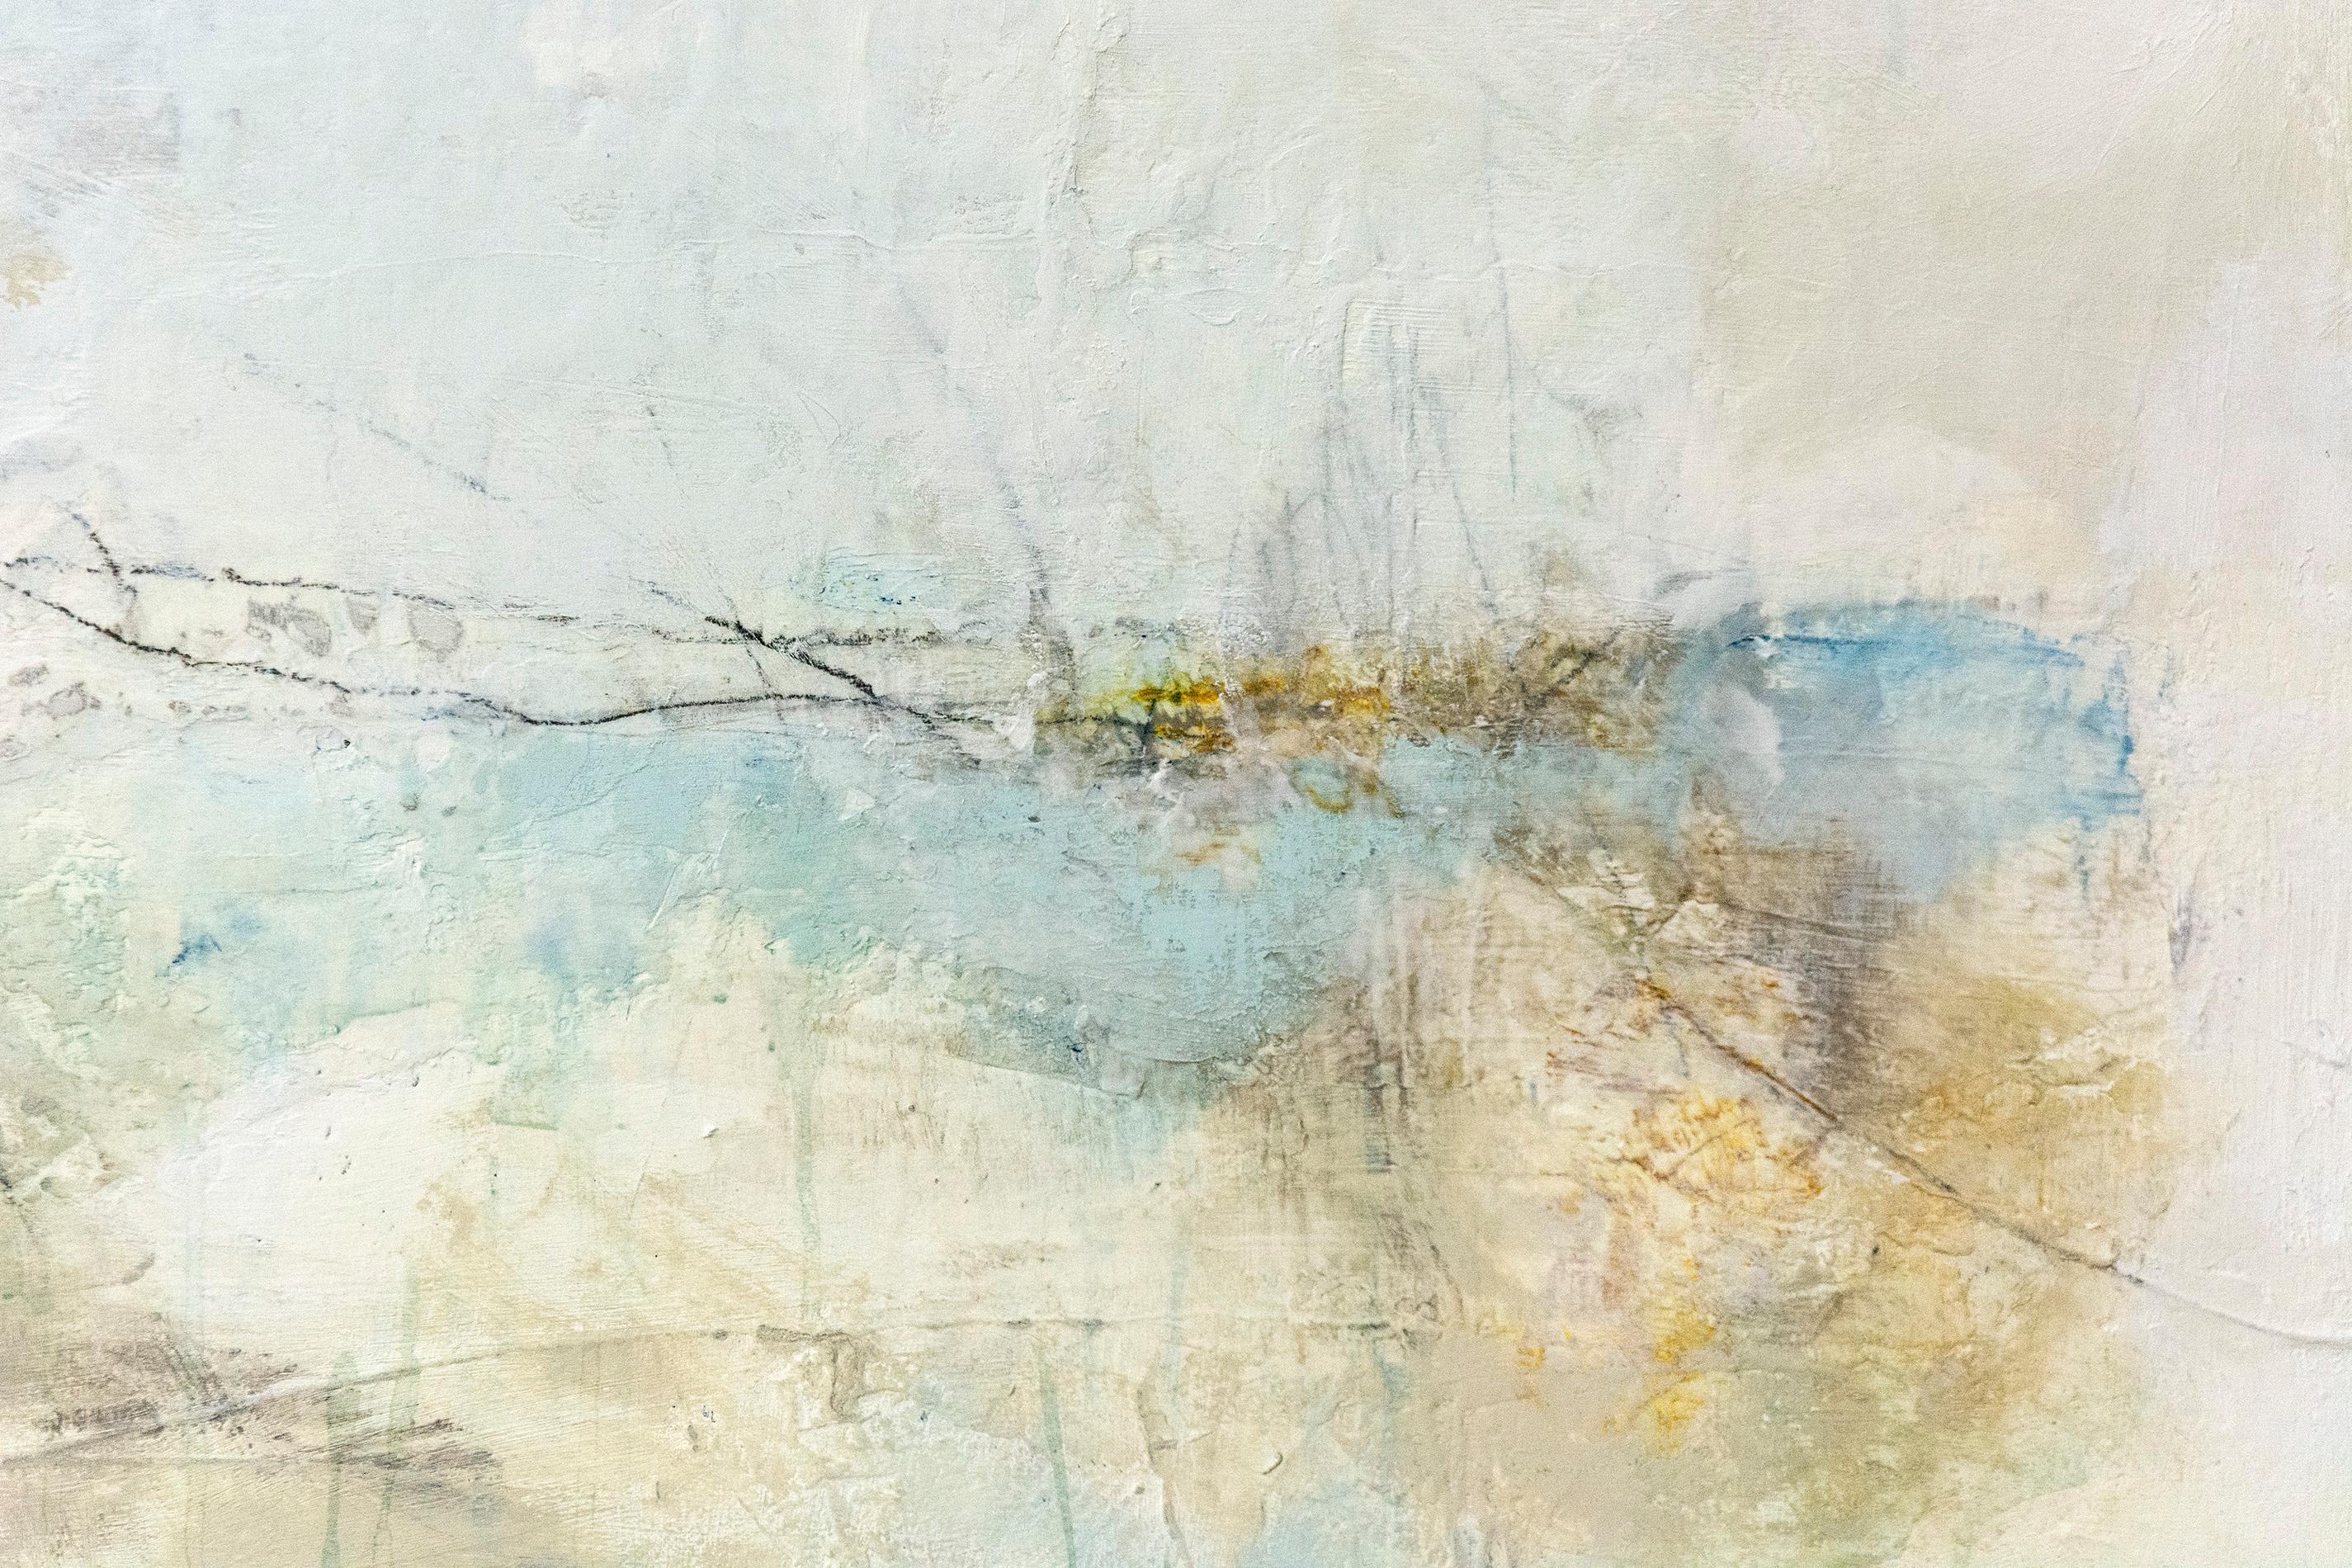 Lure Us Again - textured, muted pastel colours, abstract, acrylic on canvas 2